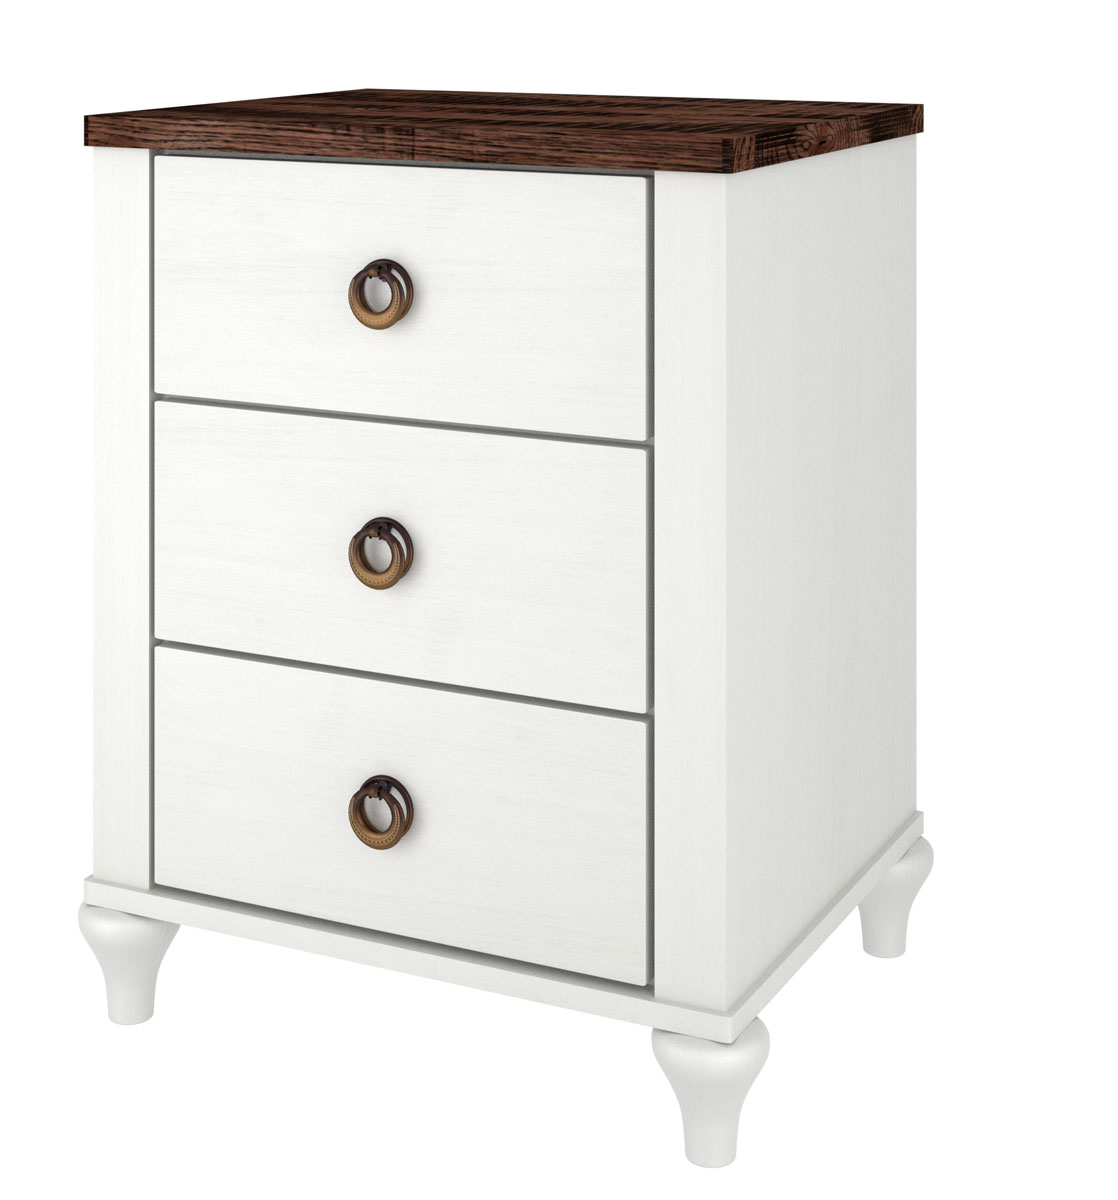 Alcan Three Drawer Nightstand in Brown Maple painted with OCS-342 Country White. Rough Sawn White Oak Top with FC-10944 Tavern Stain.